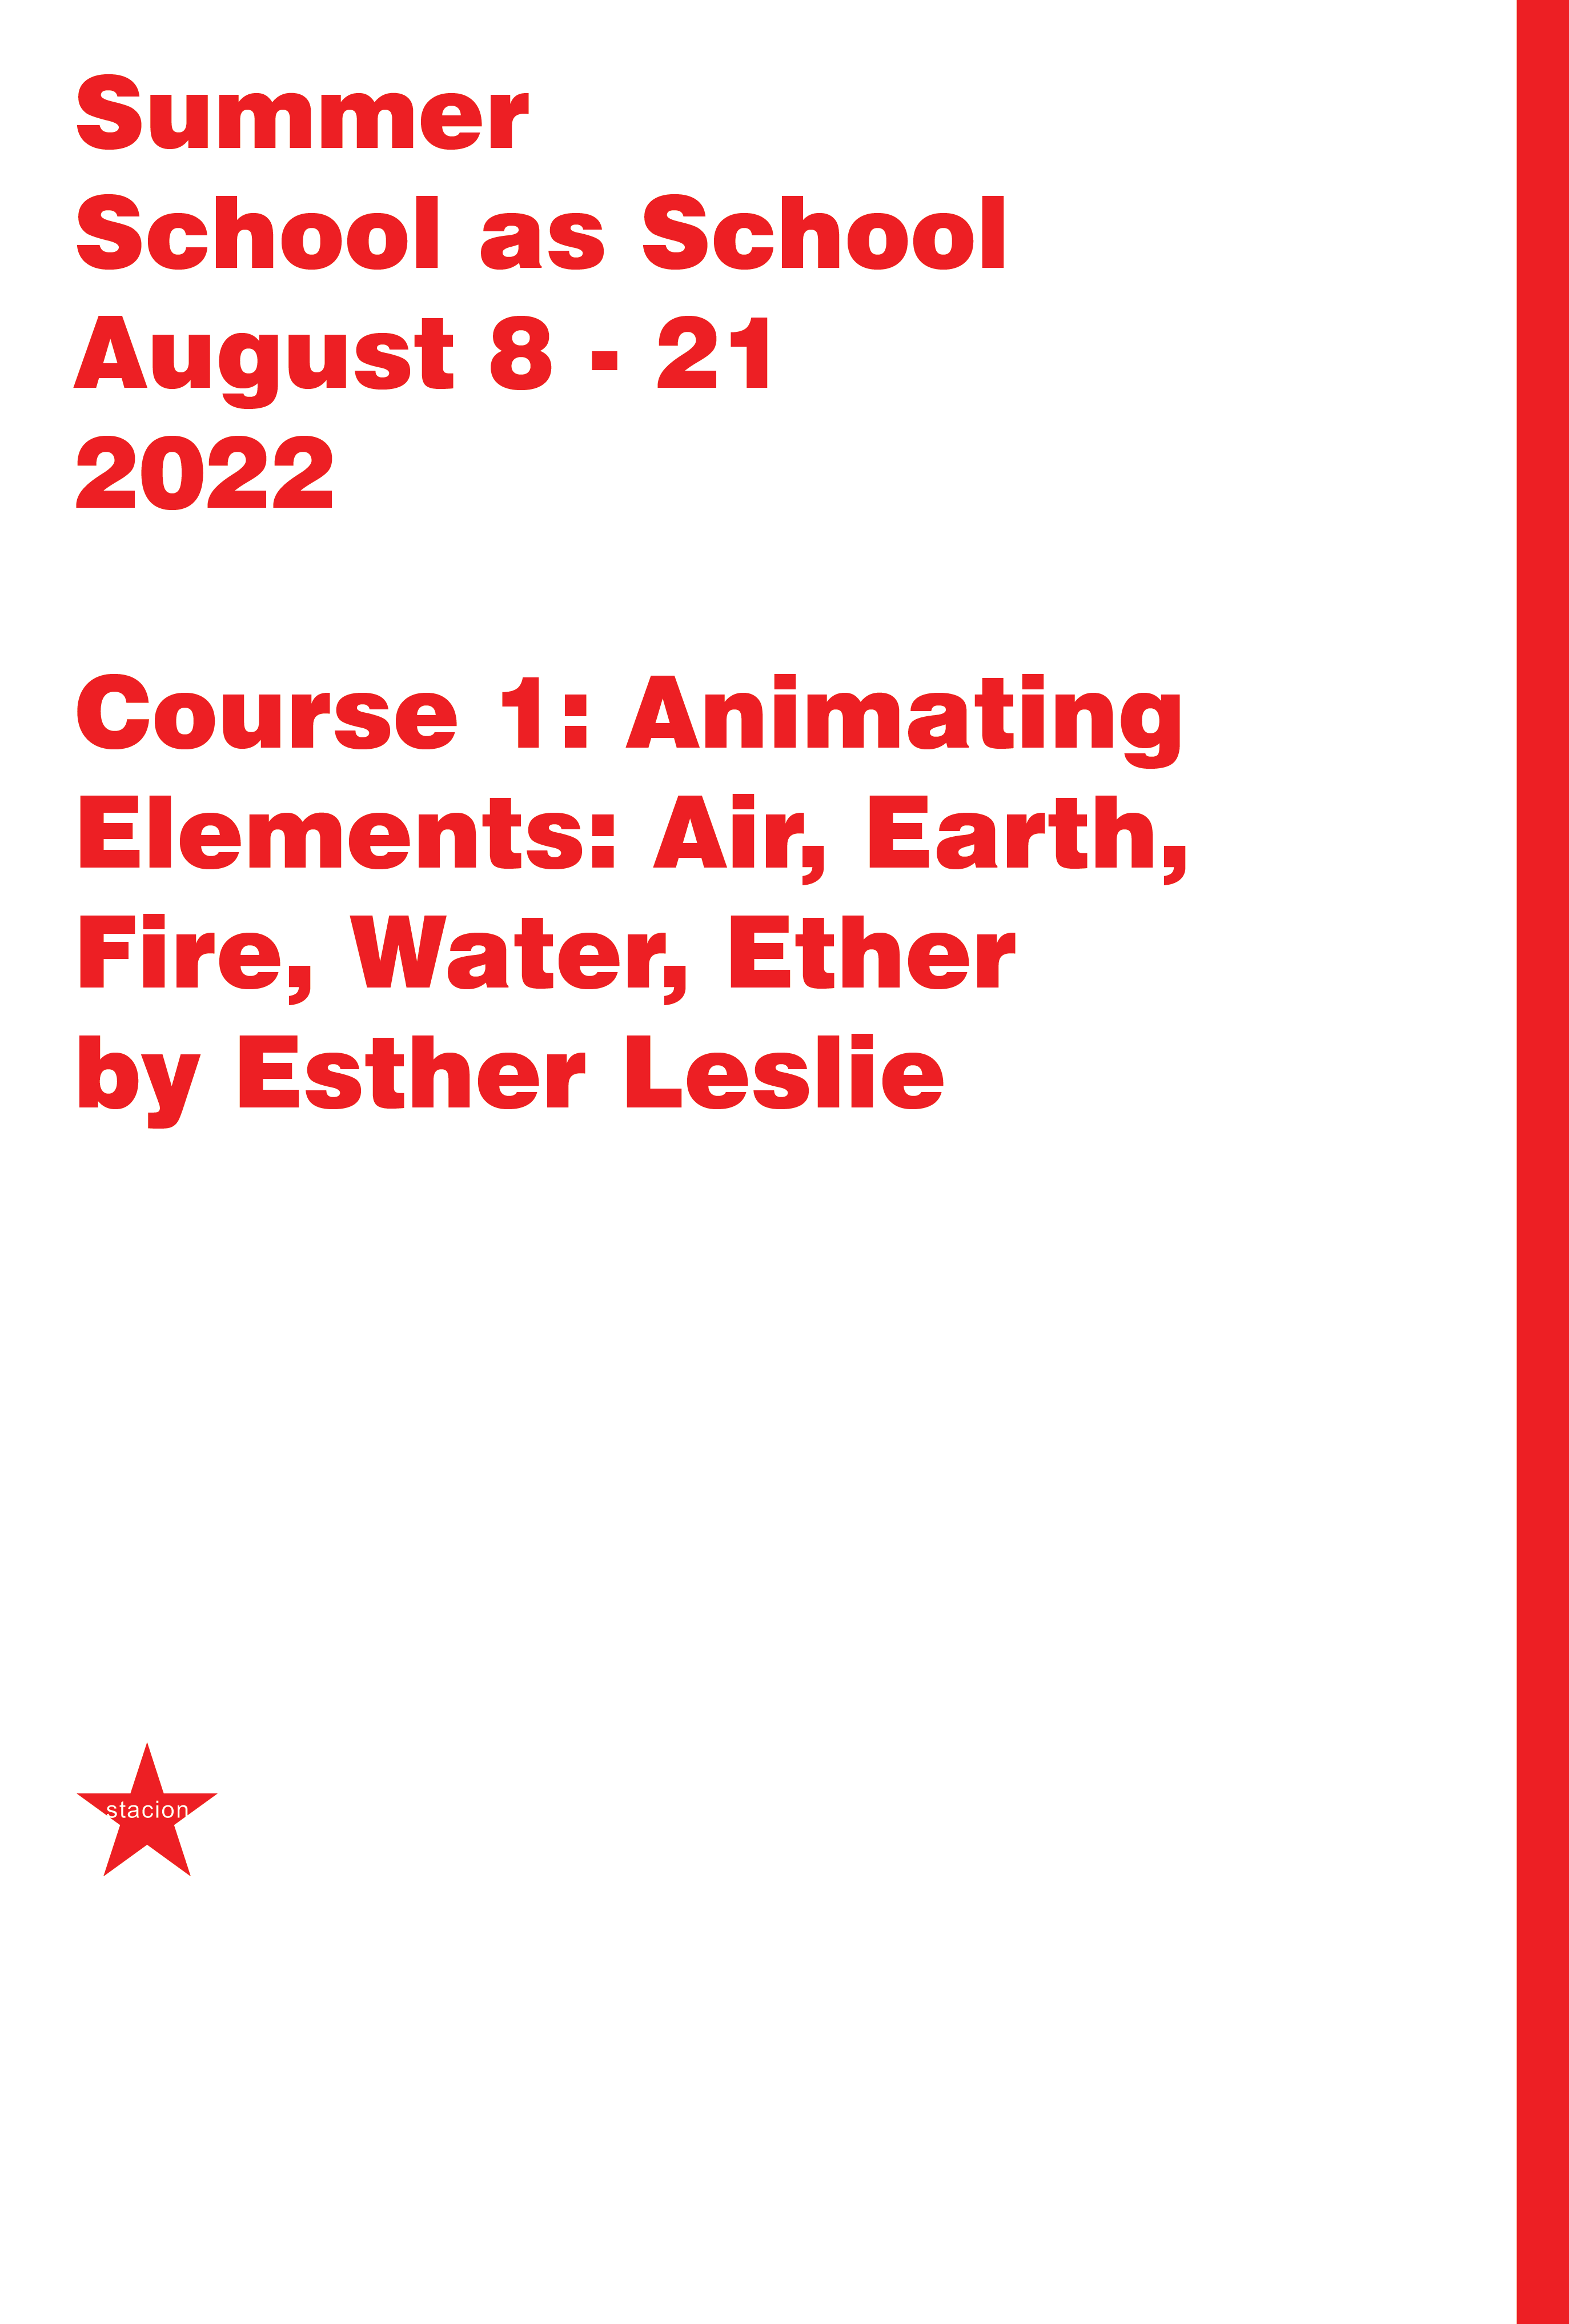 Course 1: Animating Elements: Air, Earth, Fire, Water, Ether